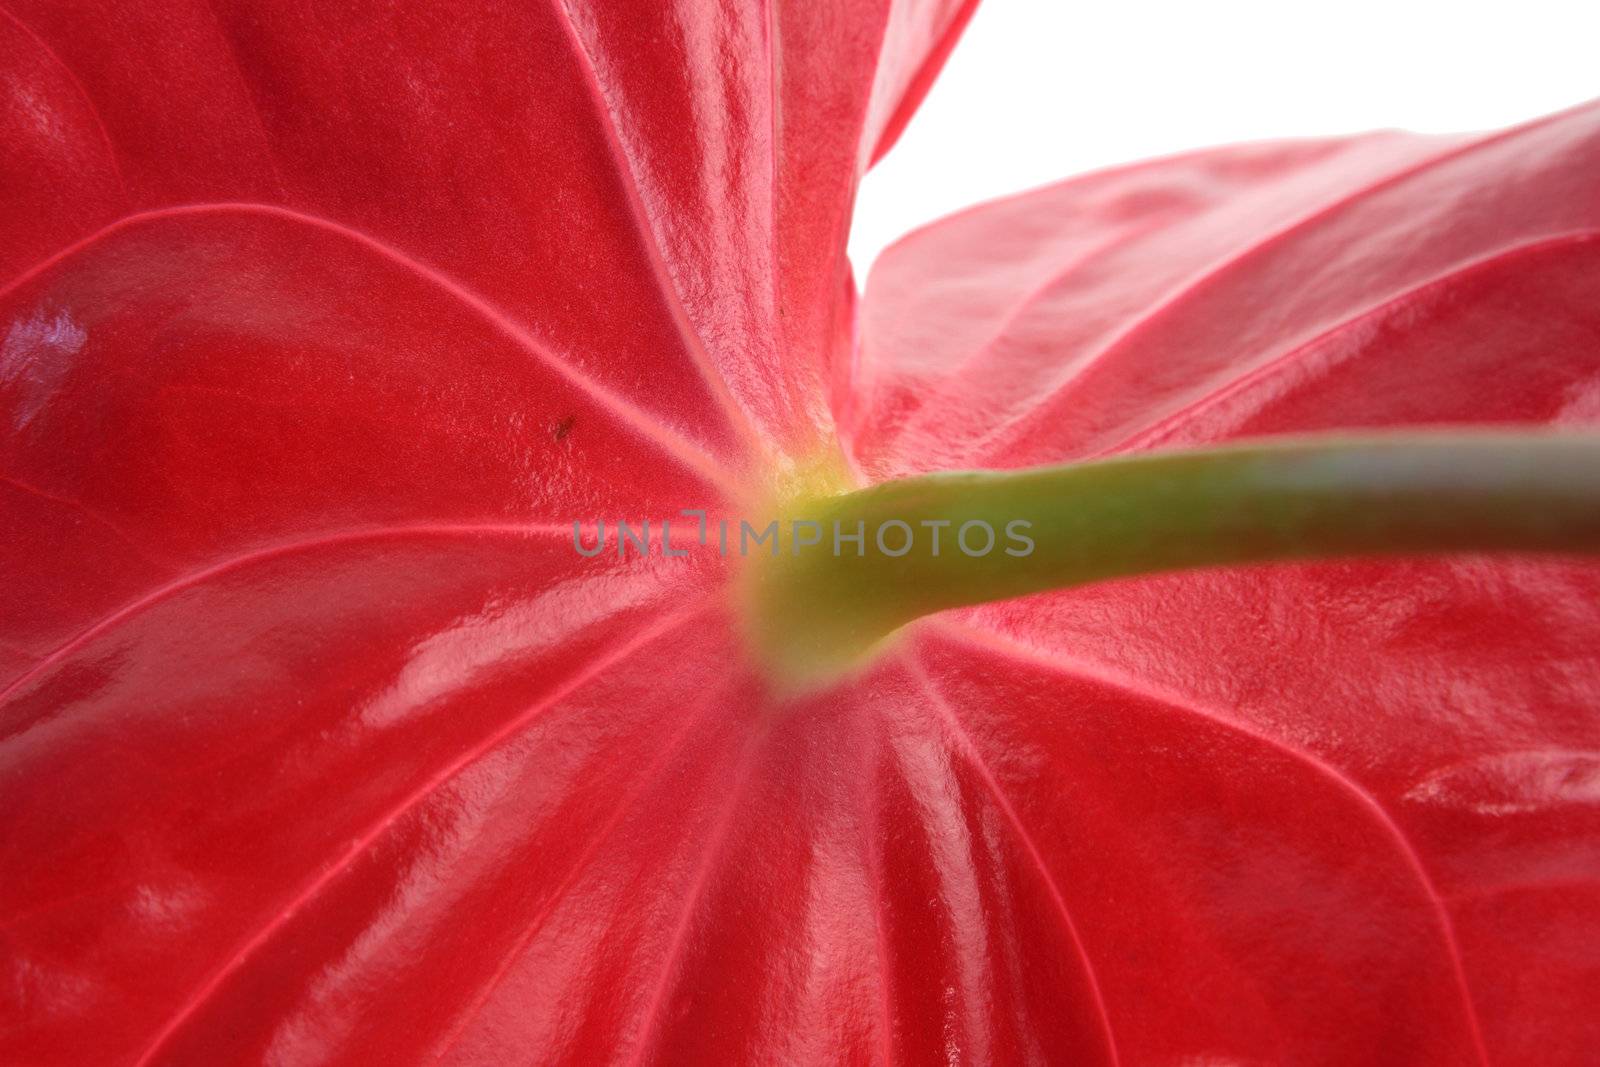 Anthurium isolated on white by BDS